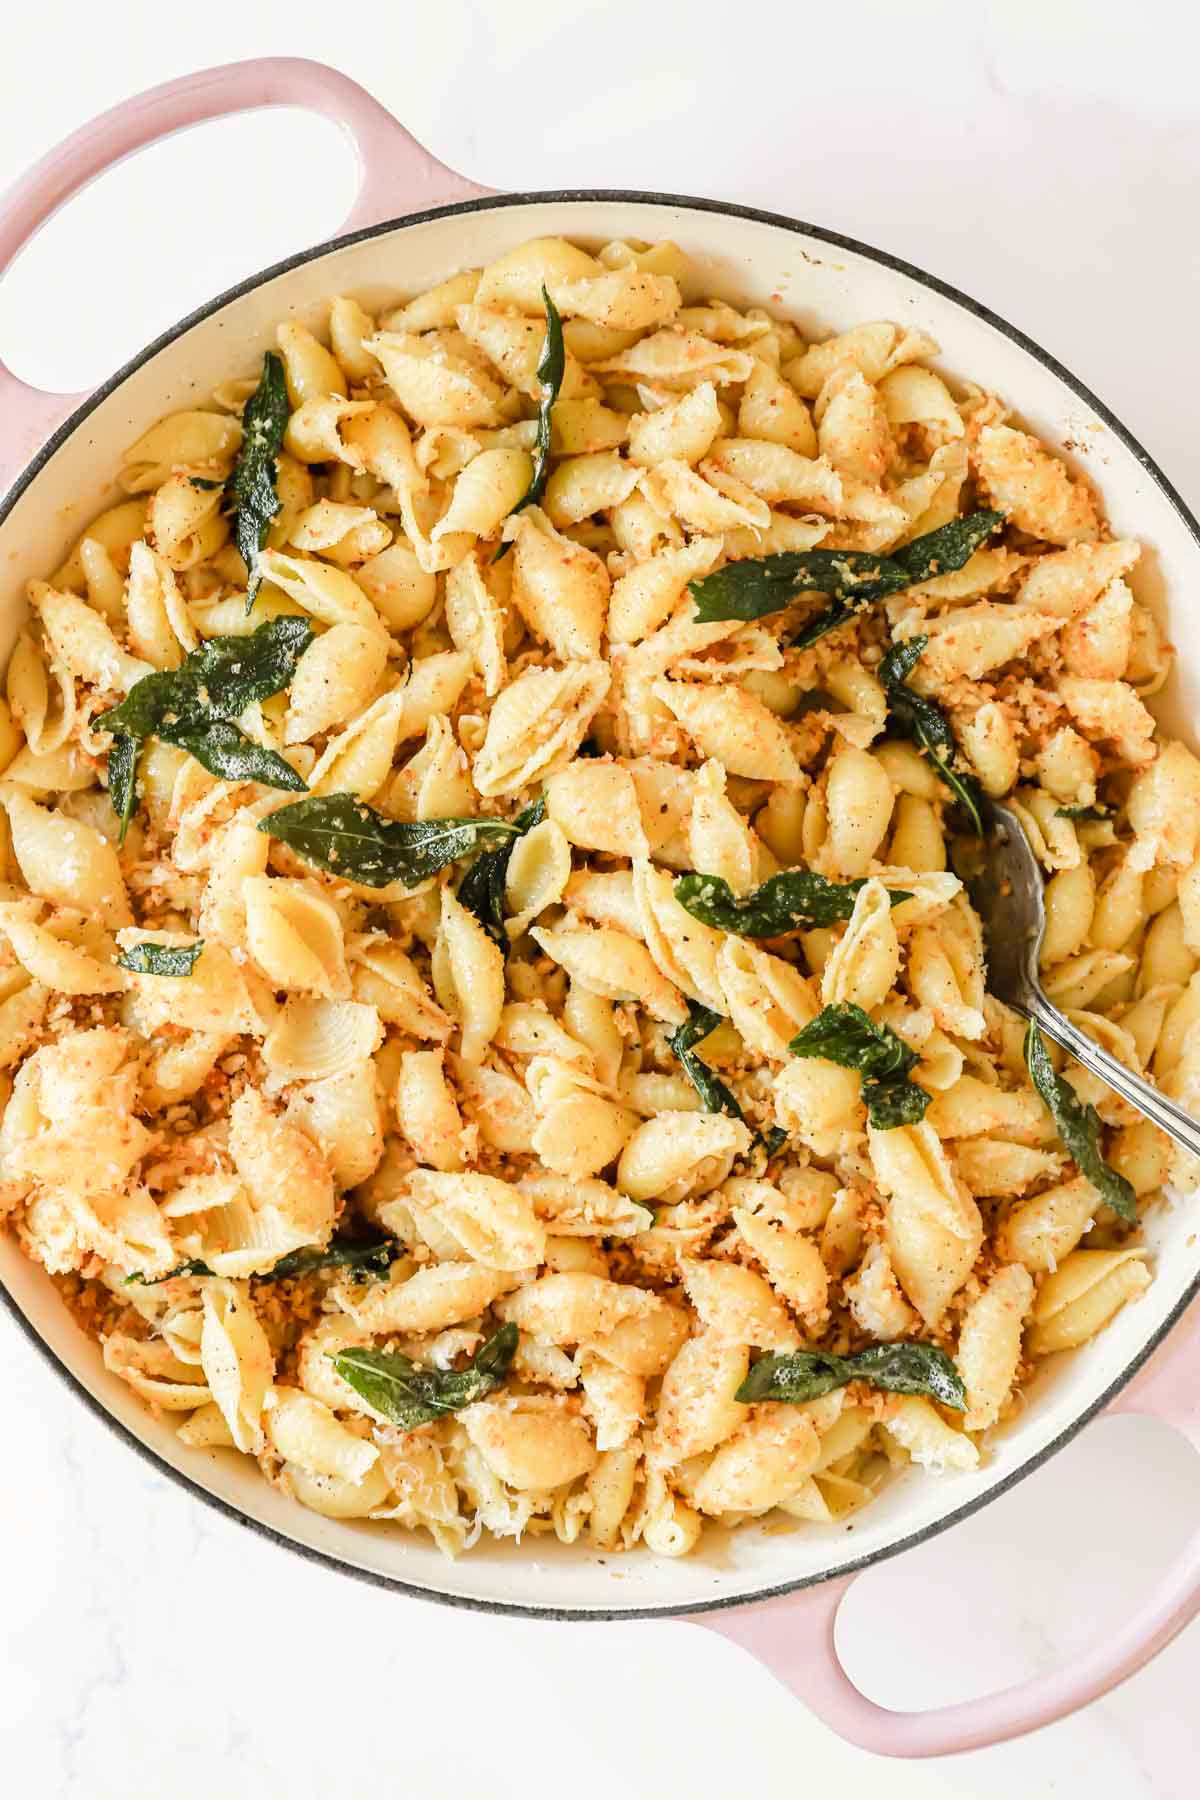 Overhead image of a large pot of brown butter pasta.